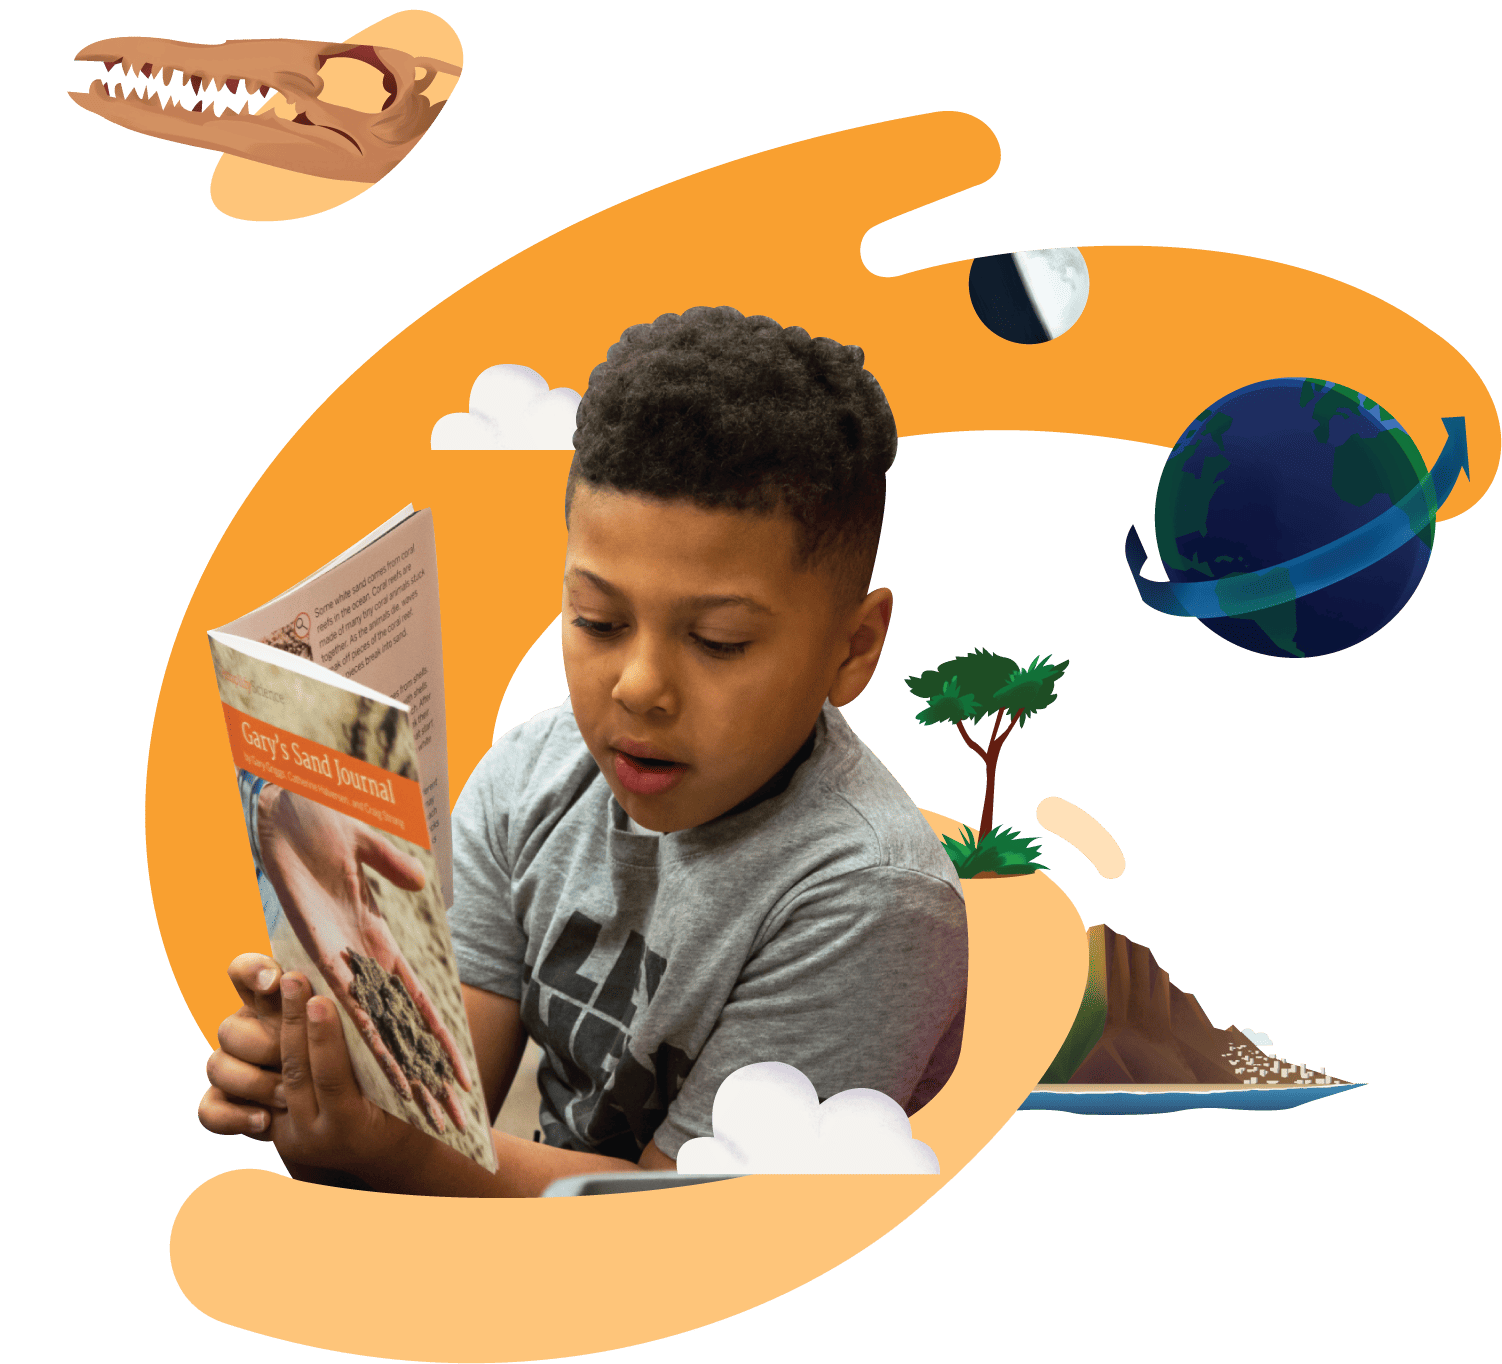 Young boy reading a book intently with illustrated elements like a dinosaur, trees, and a globe surrounding him, on a peach background.